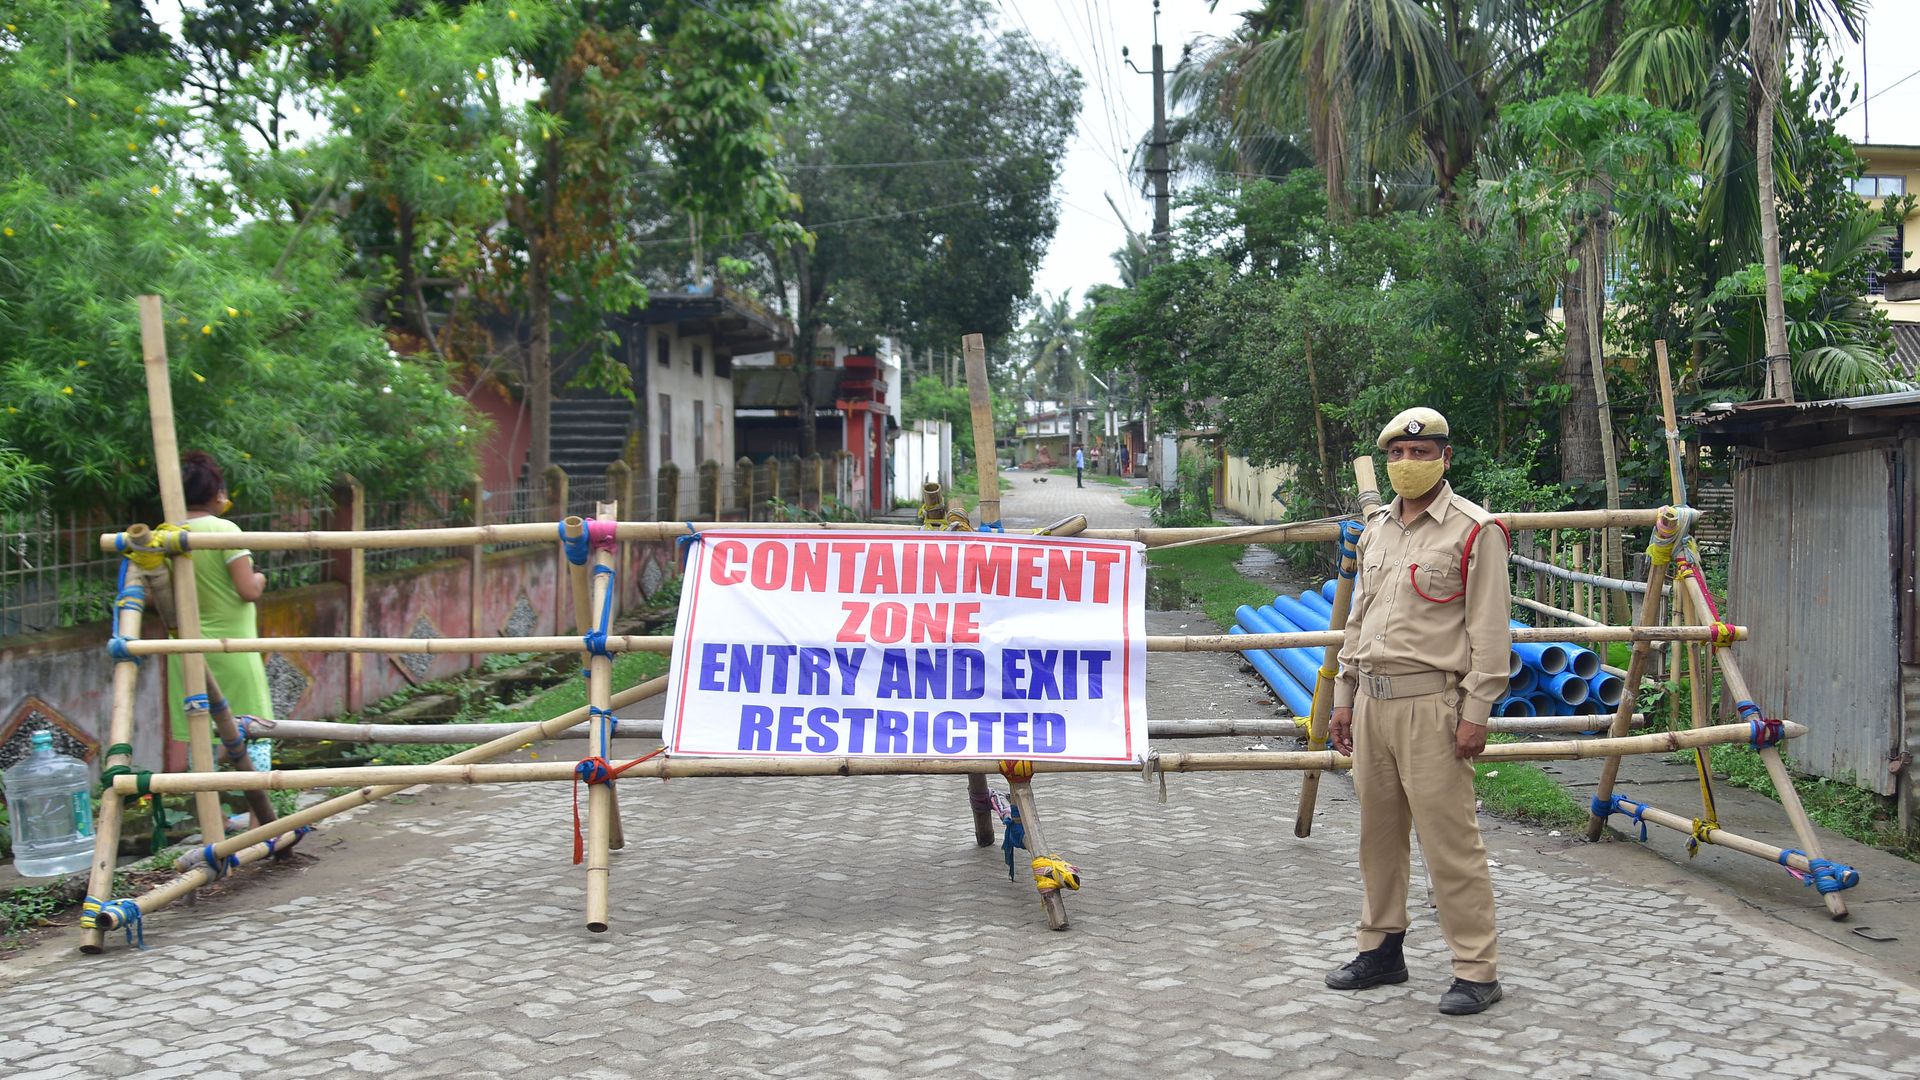 Picture of a sign that says "containment zone" in India